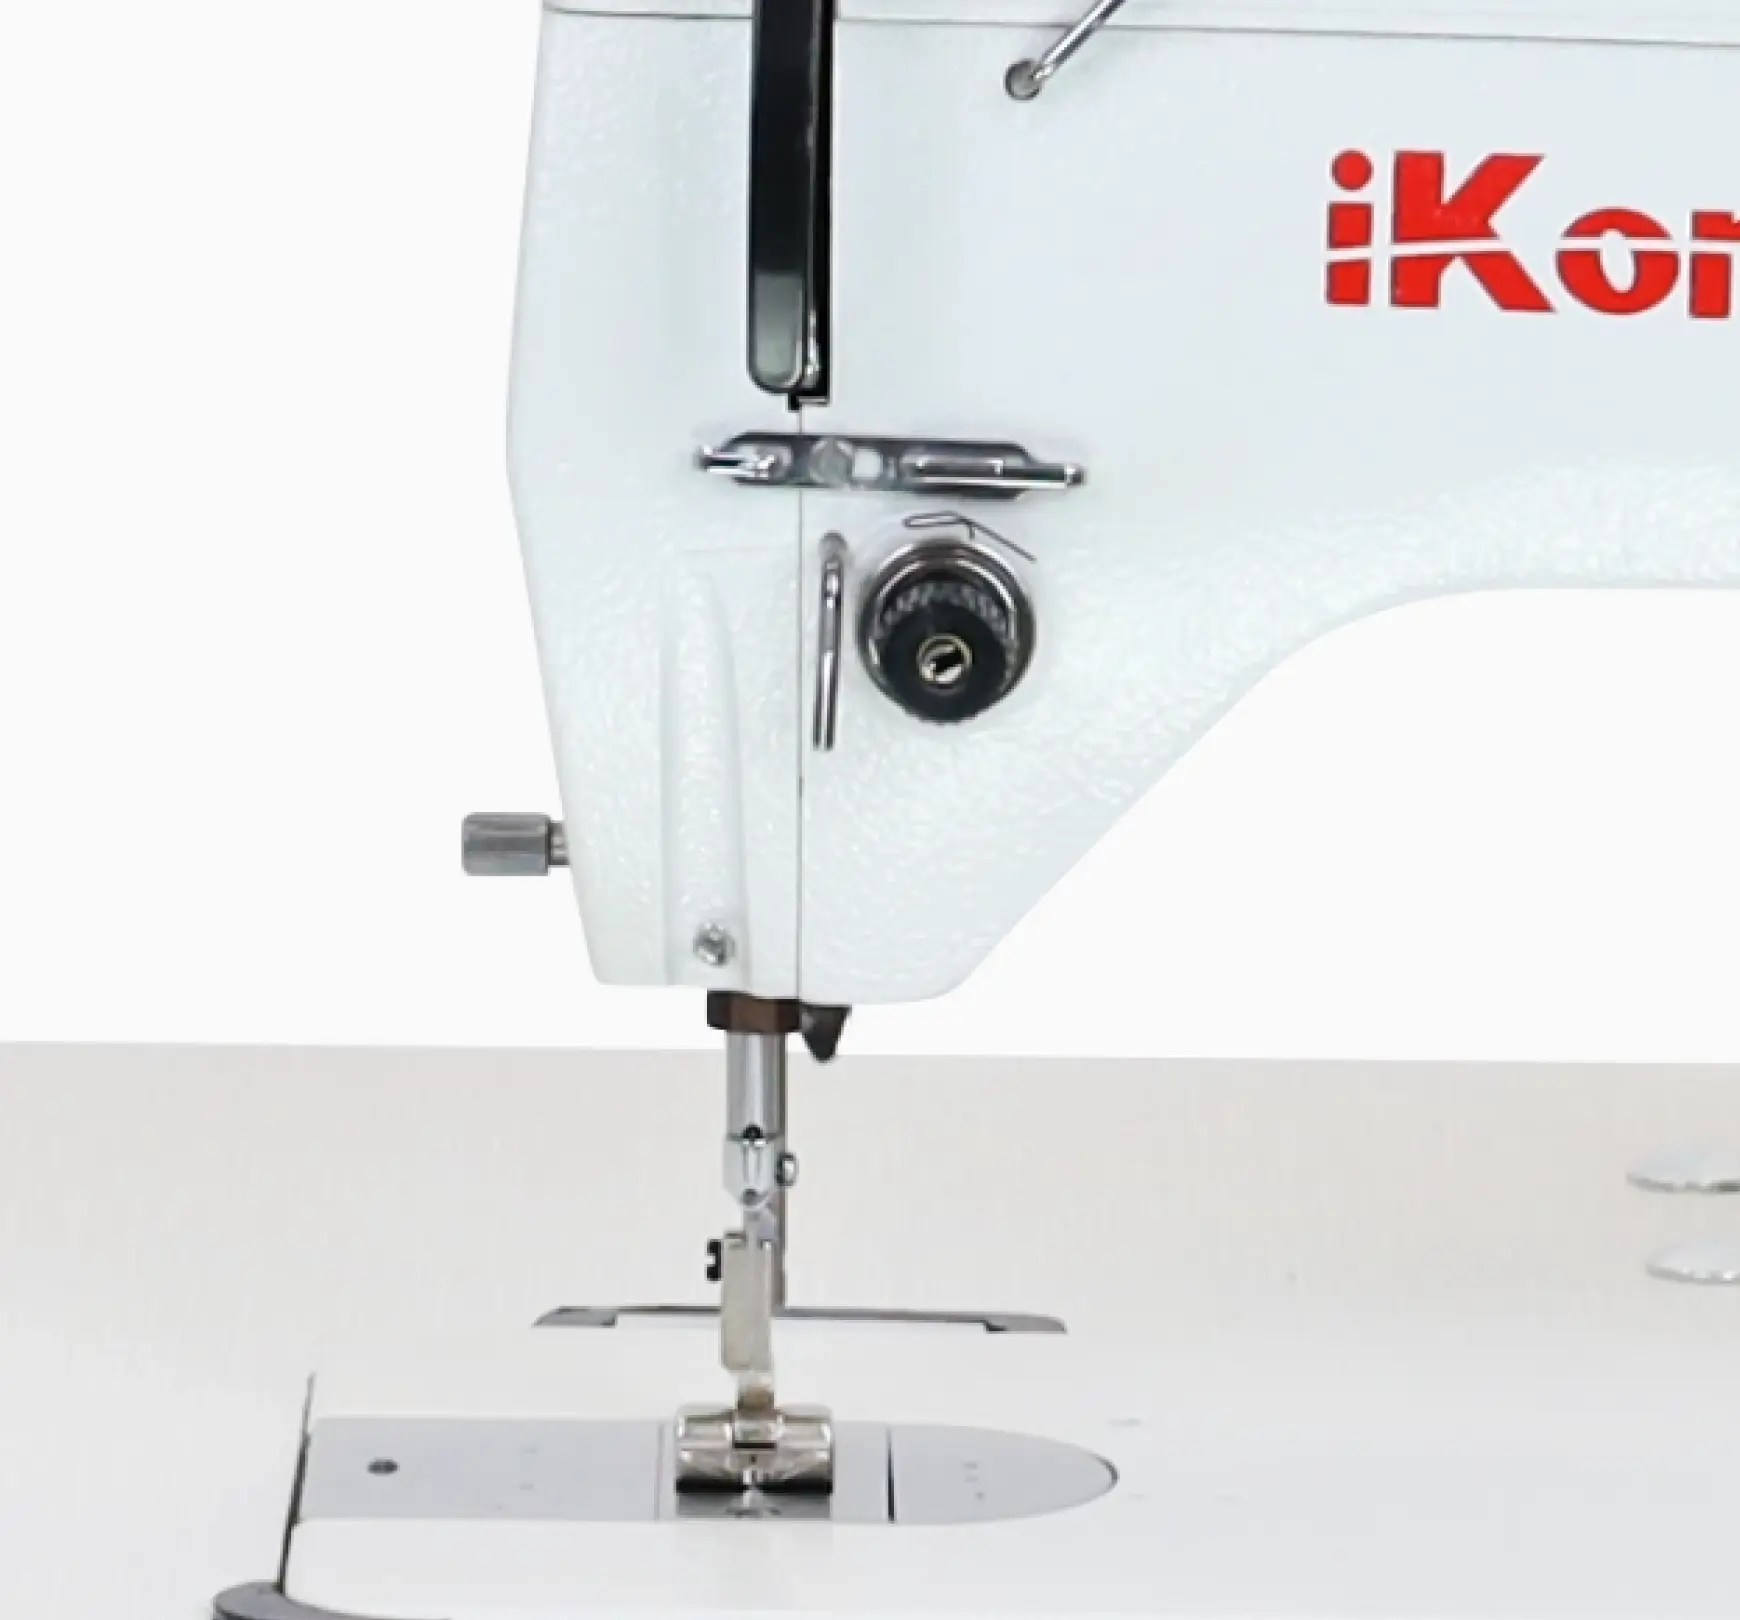 The Ikonix High-Speed Zigzag Industrial Sewing Machine is one of the fastest on the market, with a top speed of 2,000 stitches per minute